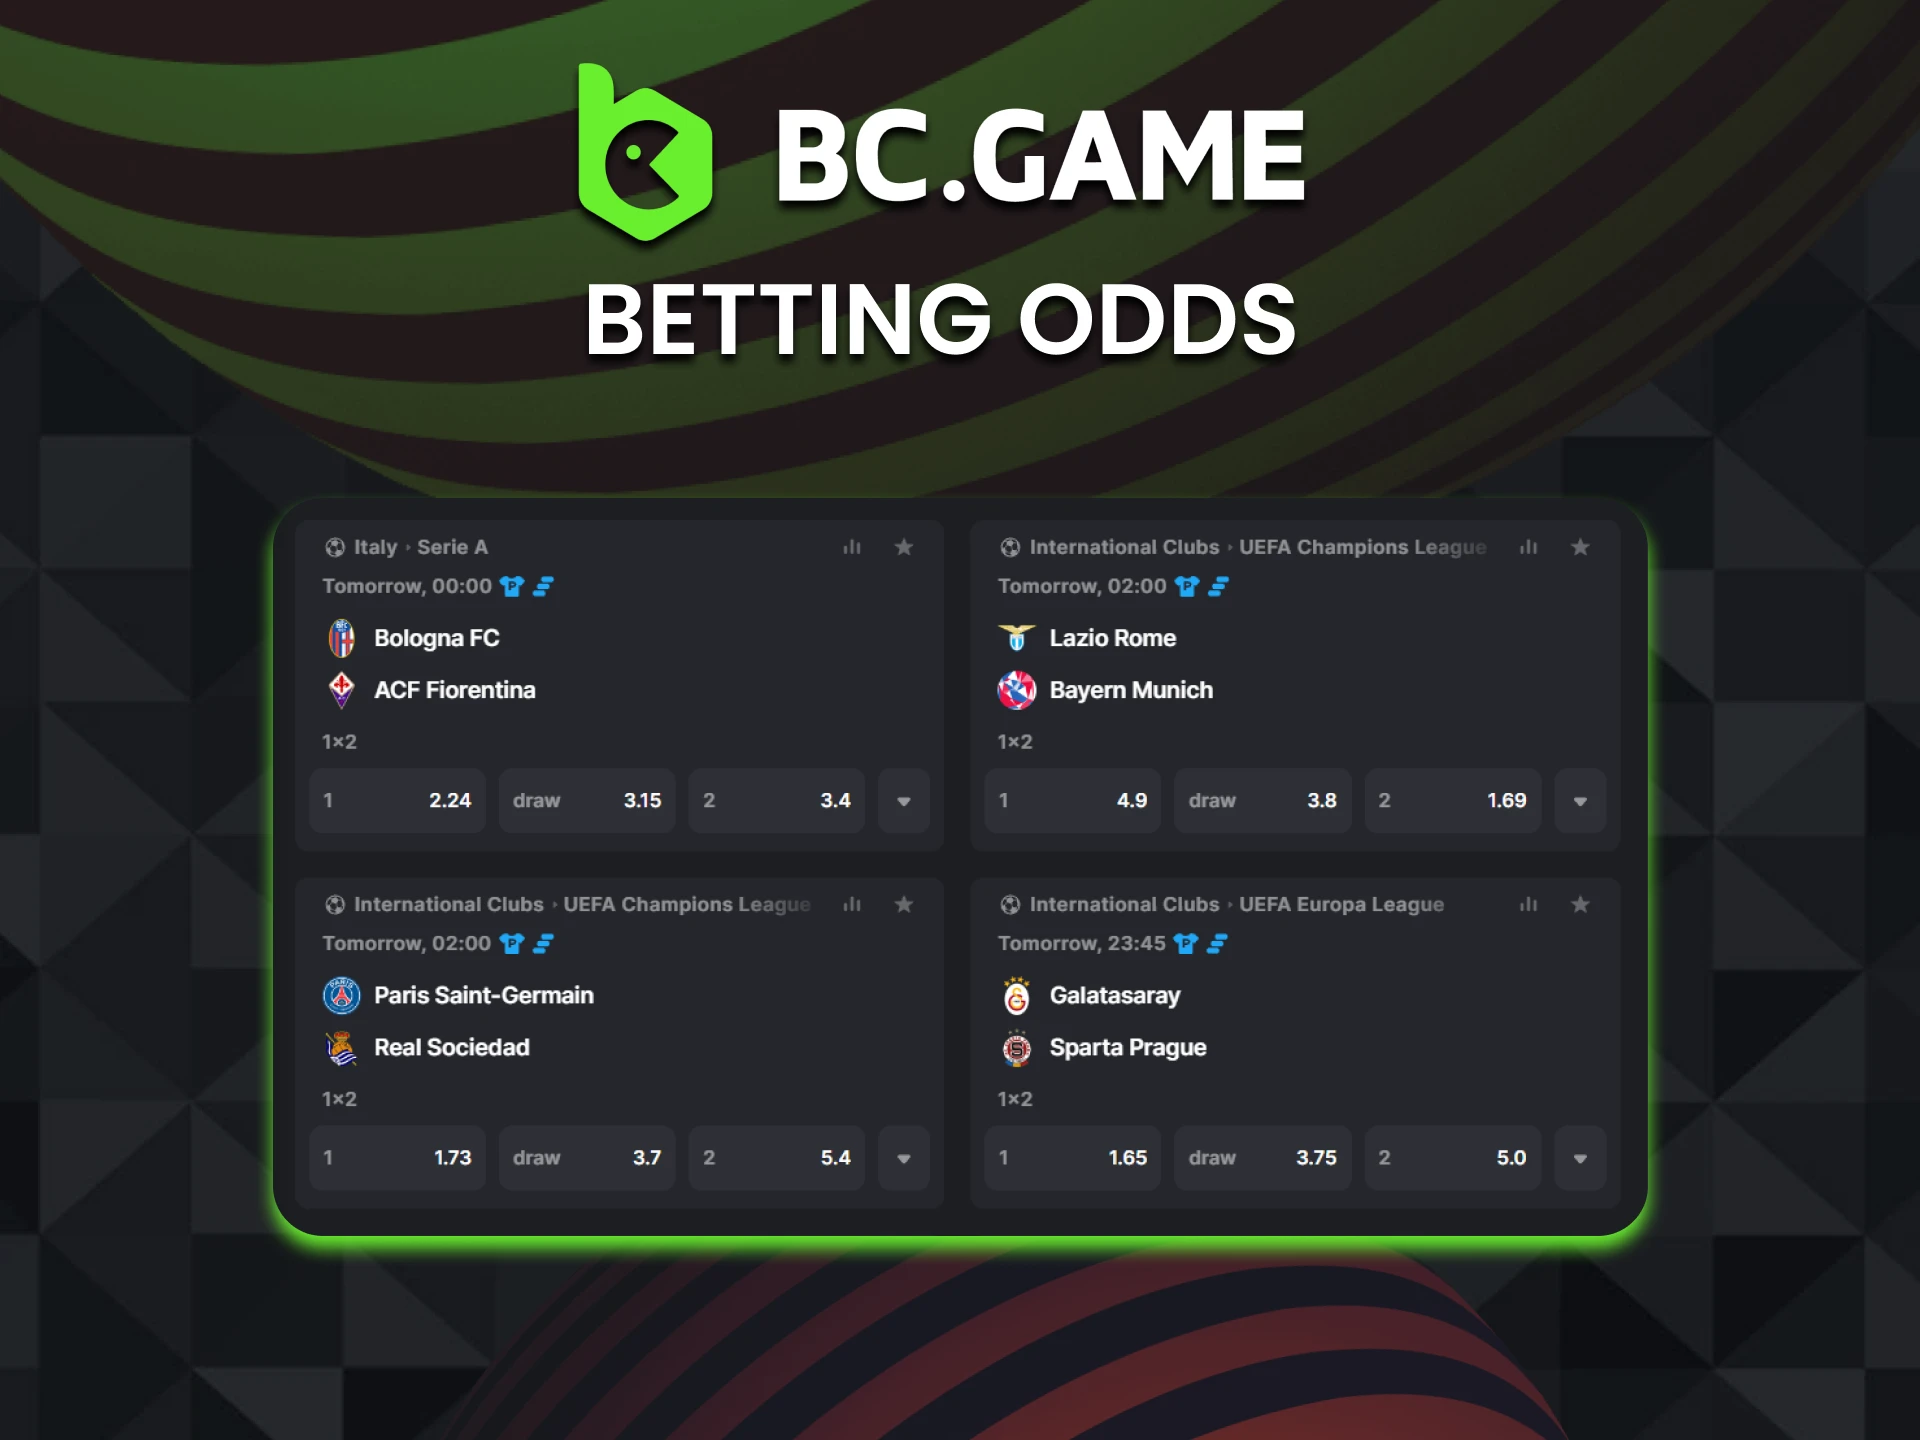 At BC Game, you can discover favorable odds for popular events that can help you make a profit.